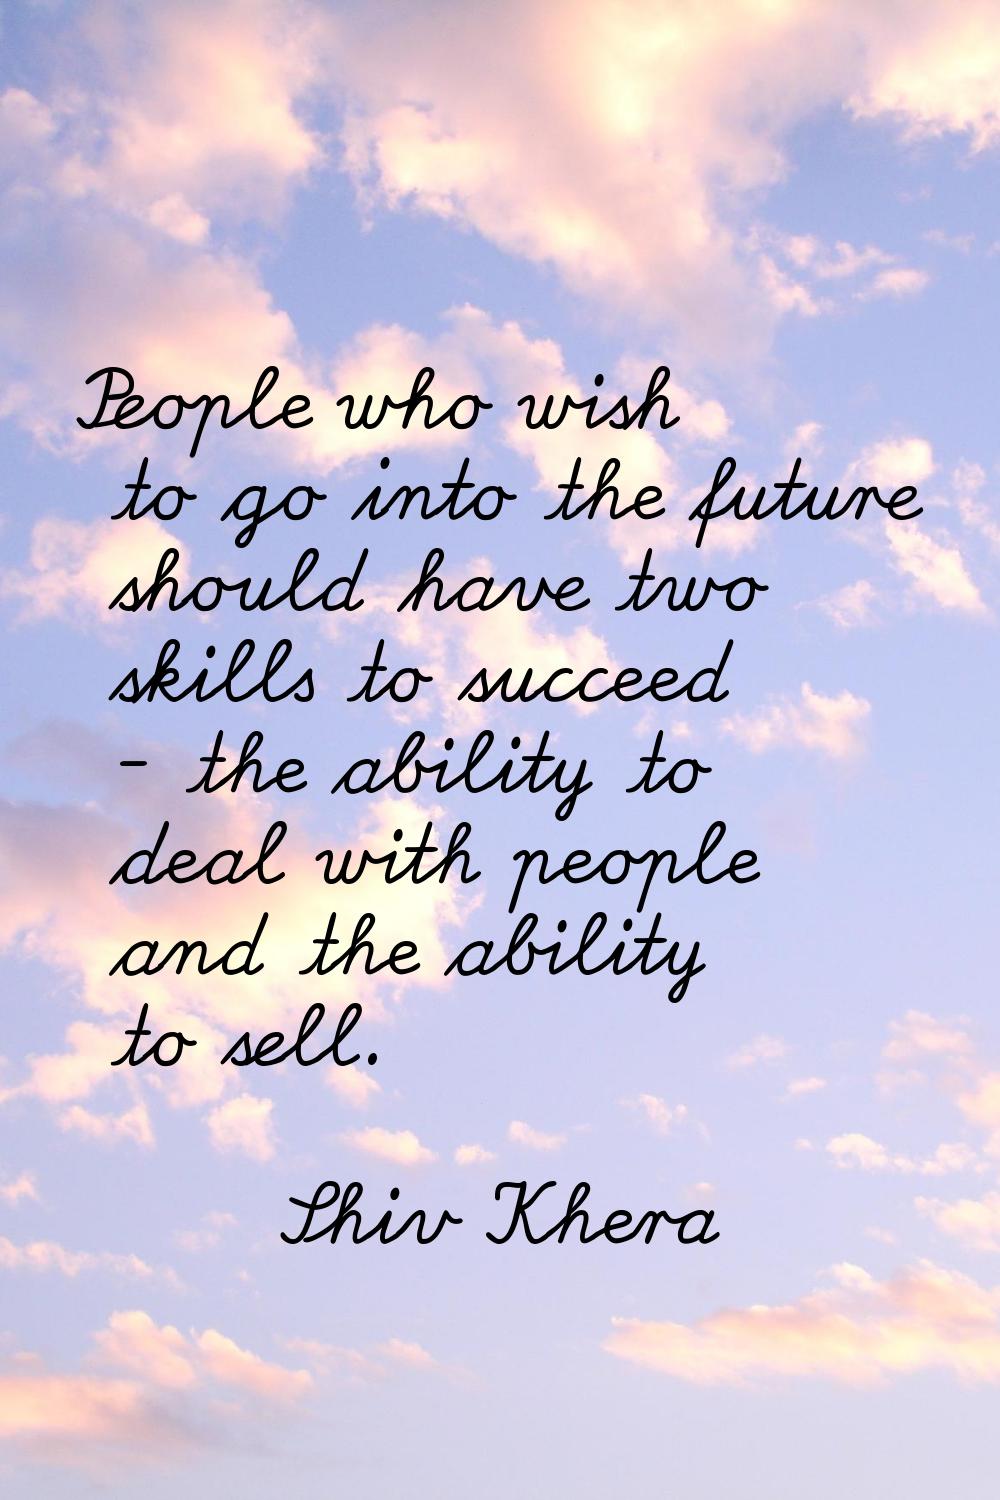 People who wish to go into the future should have two skills to succeed - the ability to deal with 